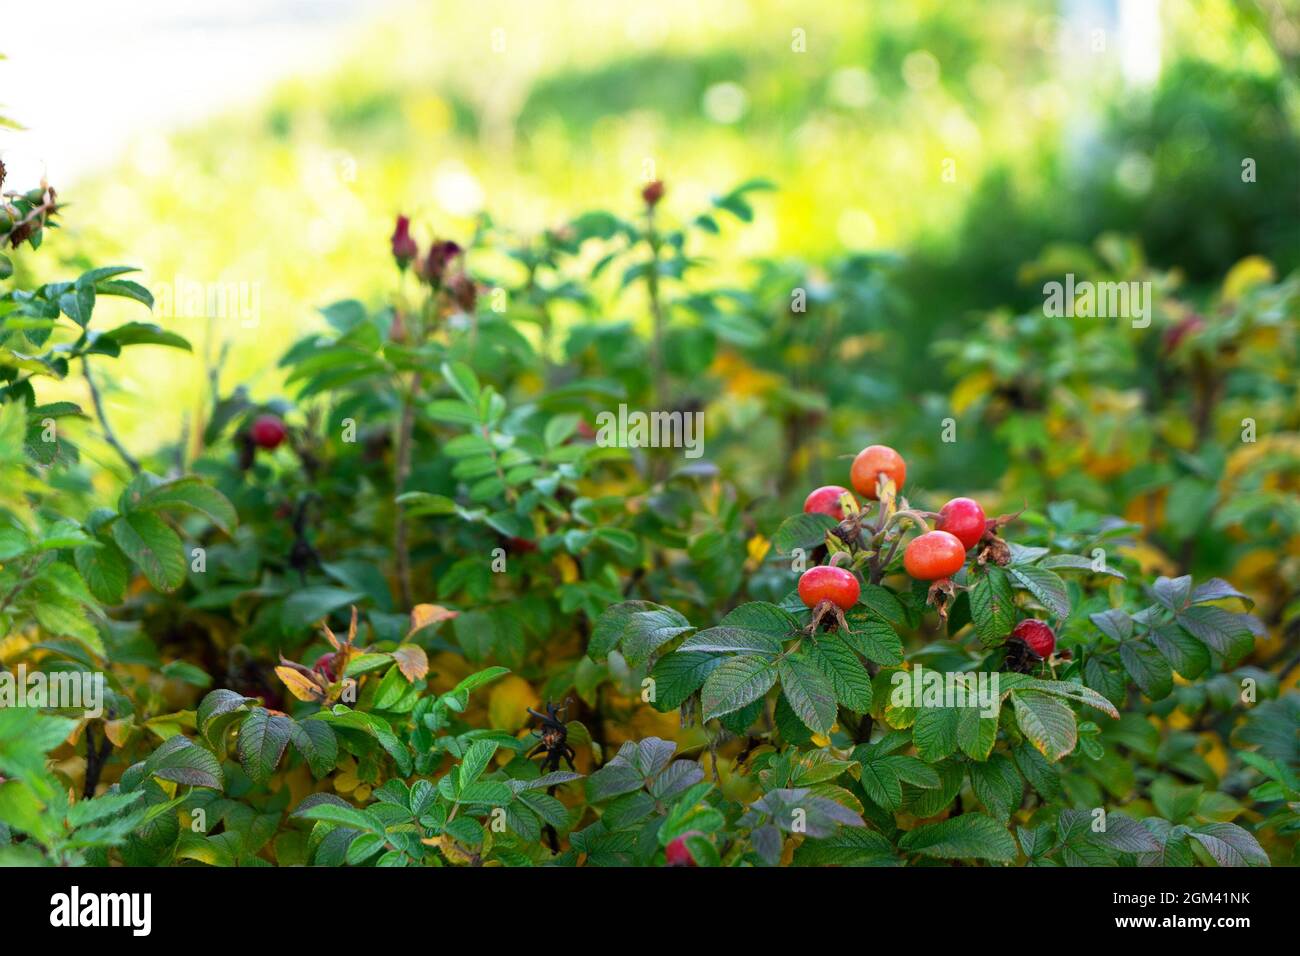 Ripe red rose hips grow on a bush in the garden. The concept of healthy herbal tea, alternative medicine, natural vitamin C. Stock Photo